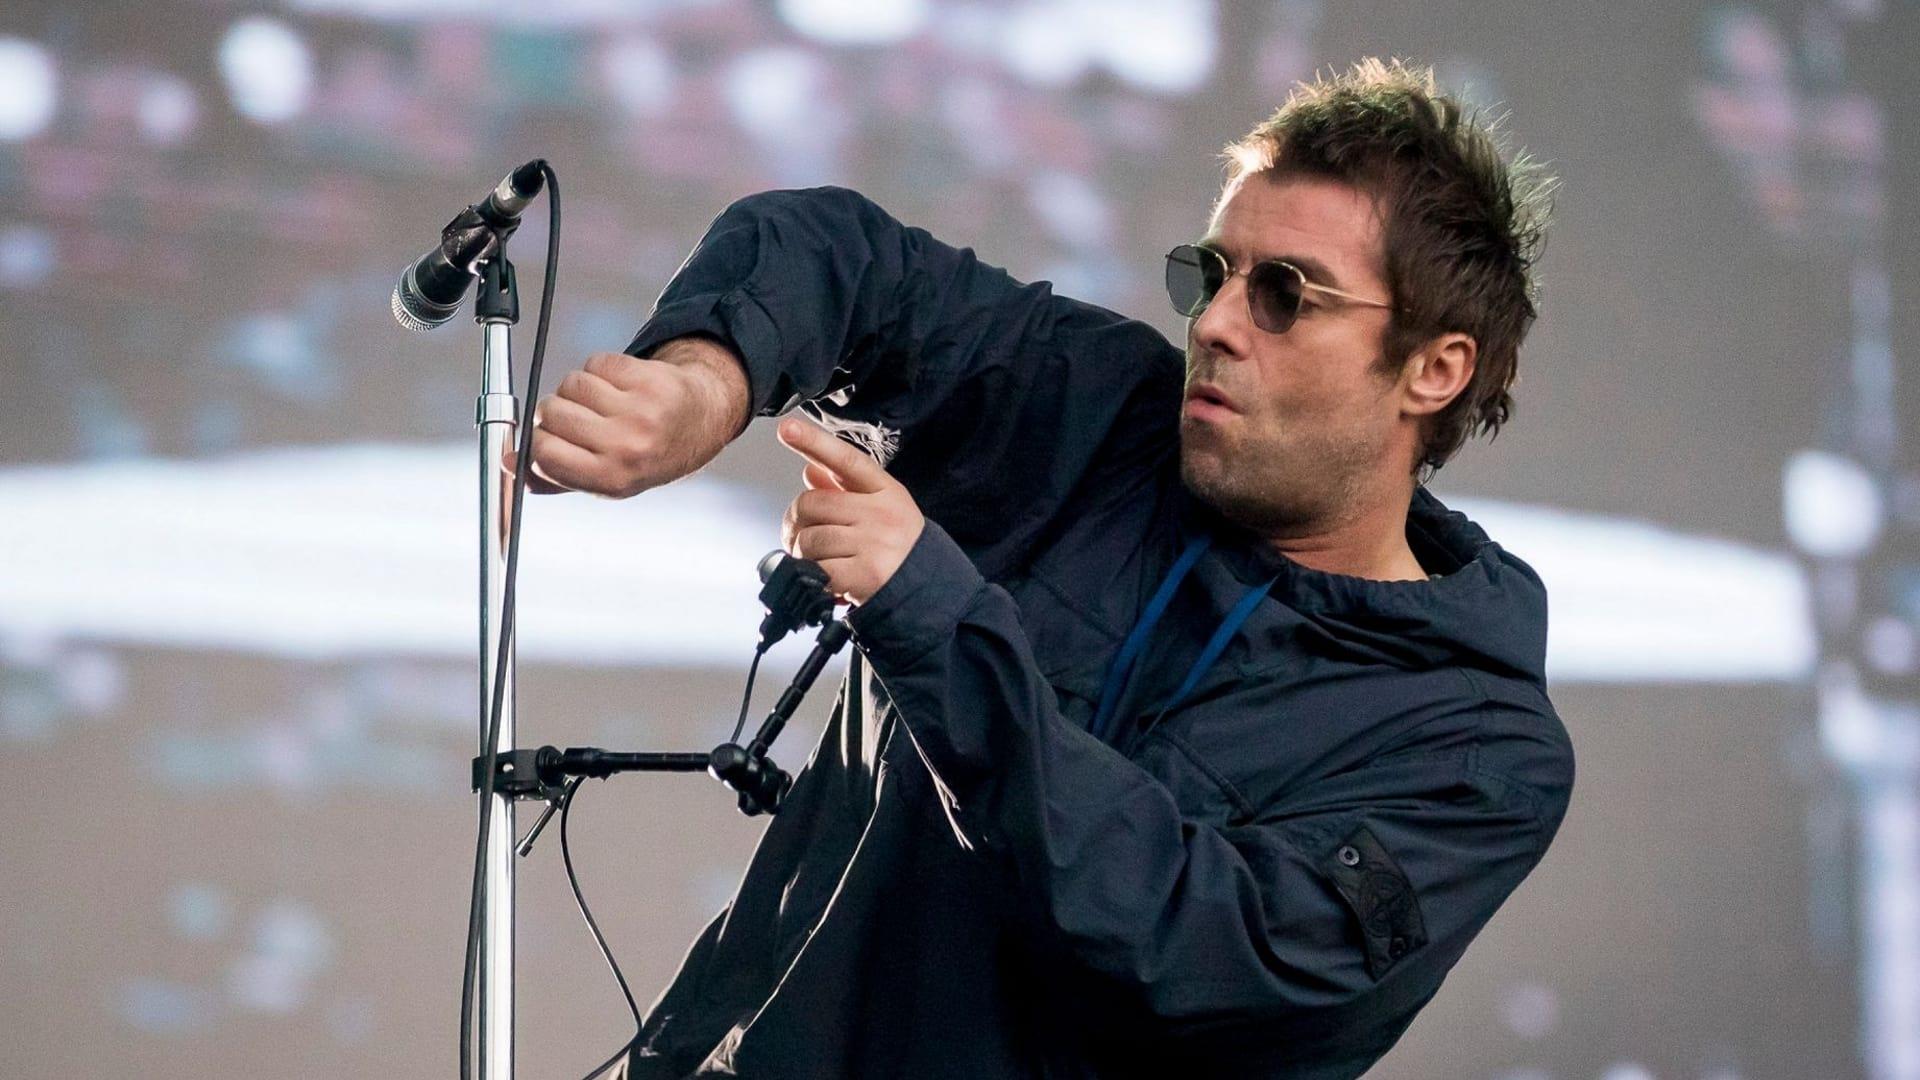 Liam Gallagher - BBC The Biggest Weekend 2018 backdrop